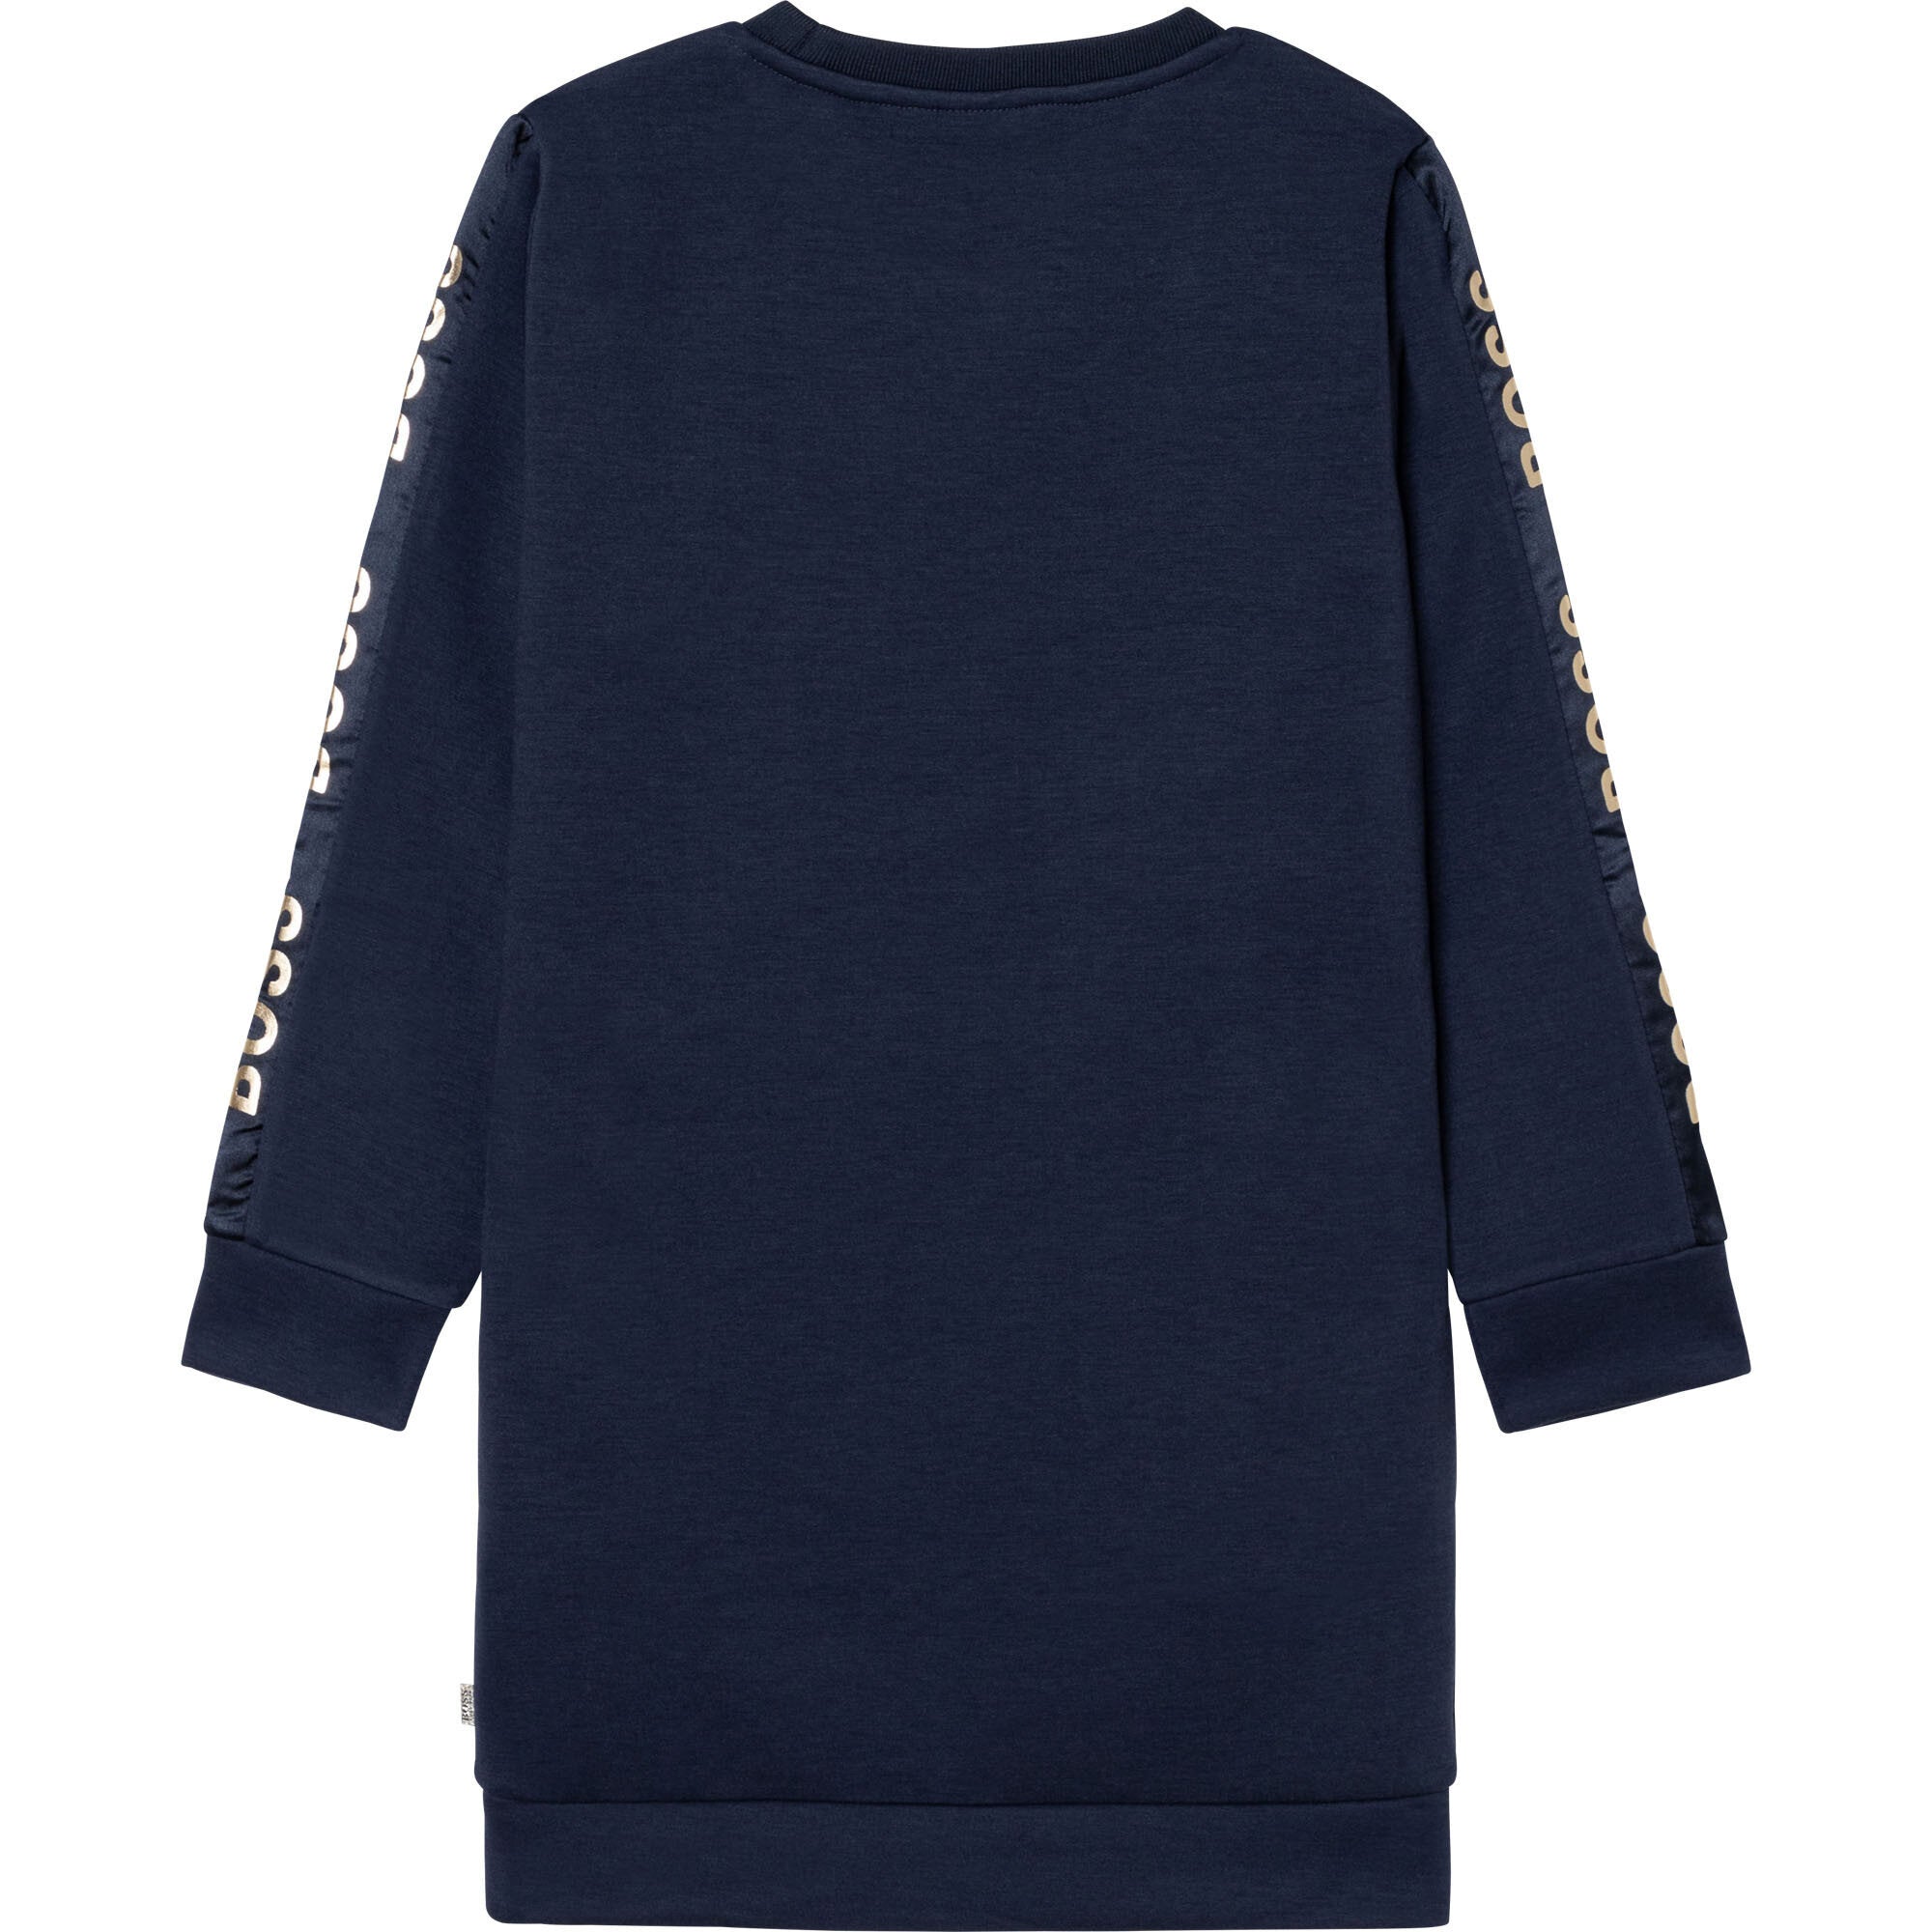 long sleeves navy blue girl dress with navy satin band on the sleeves with Boss logo in gold.